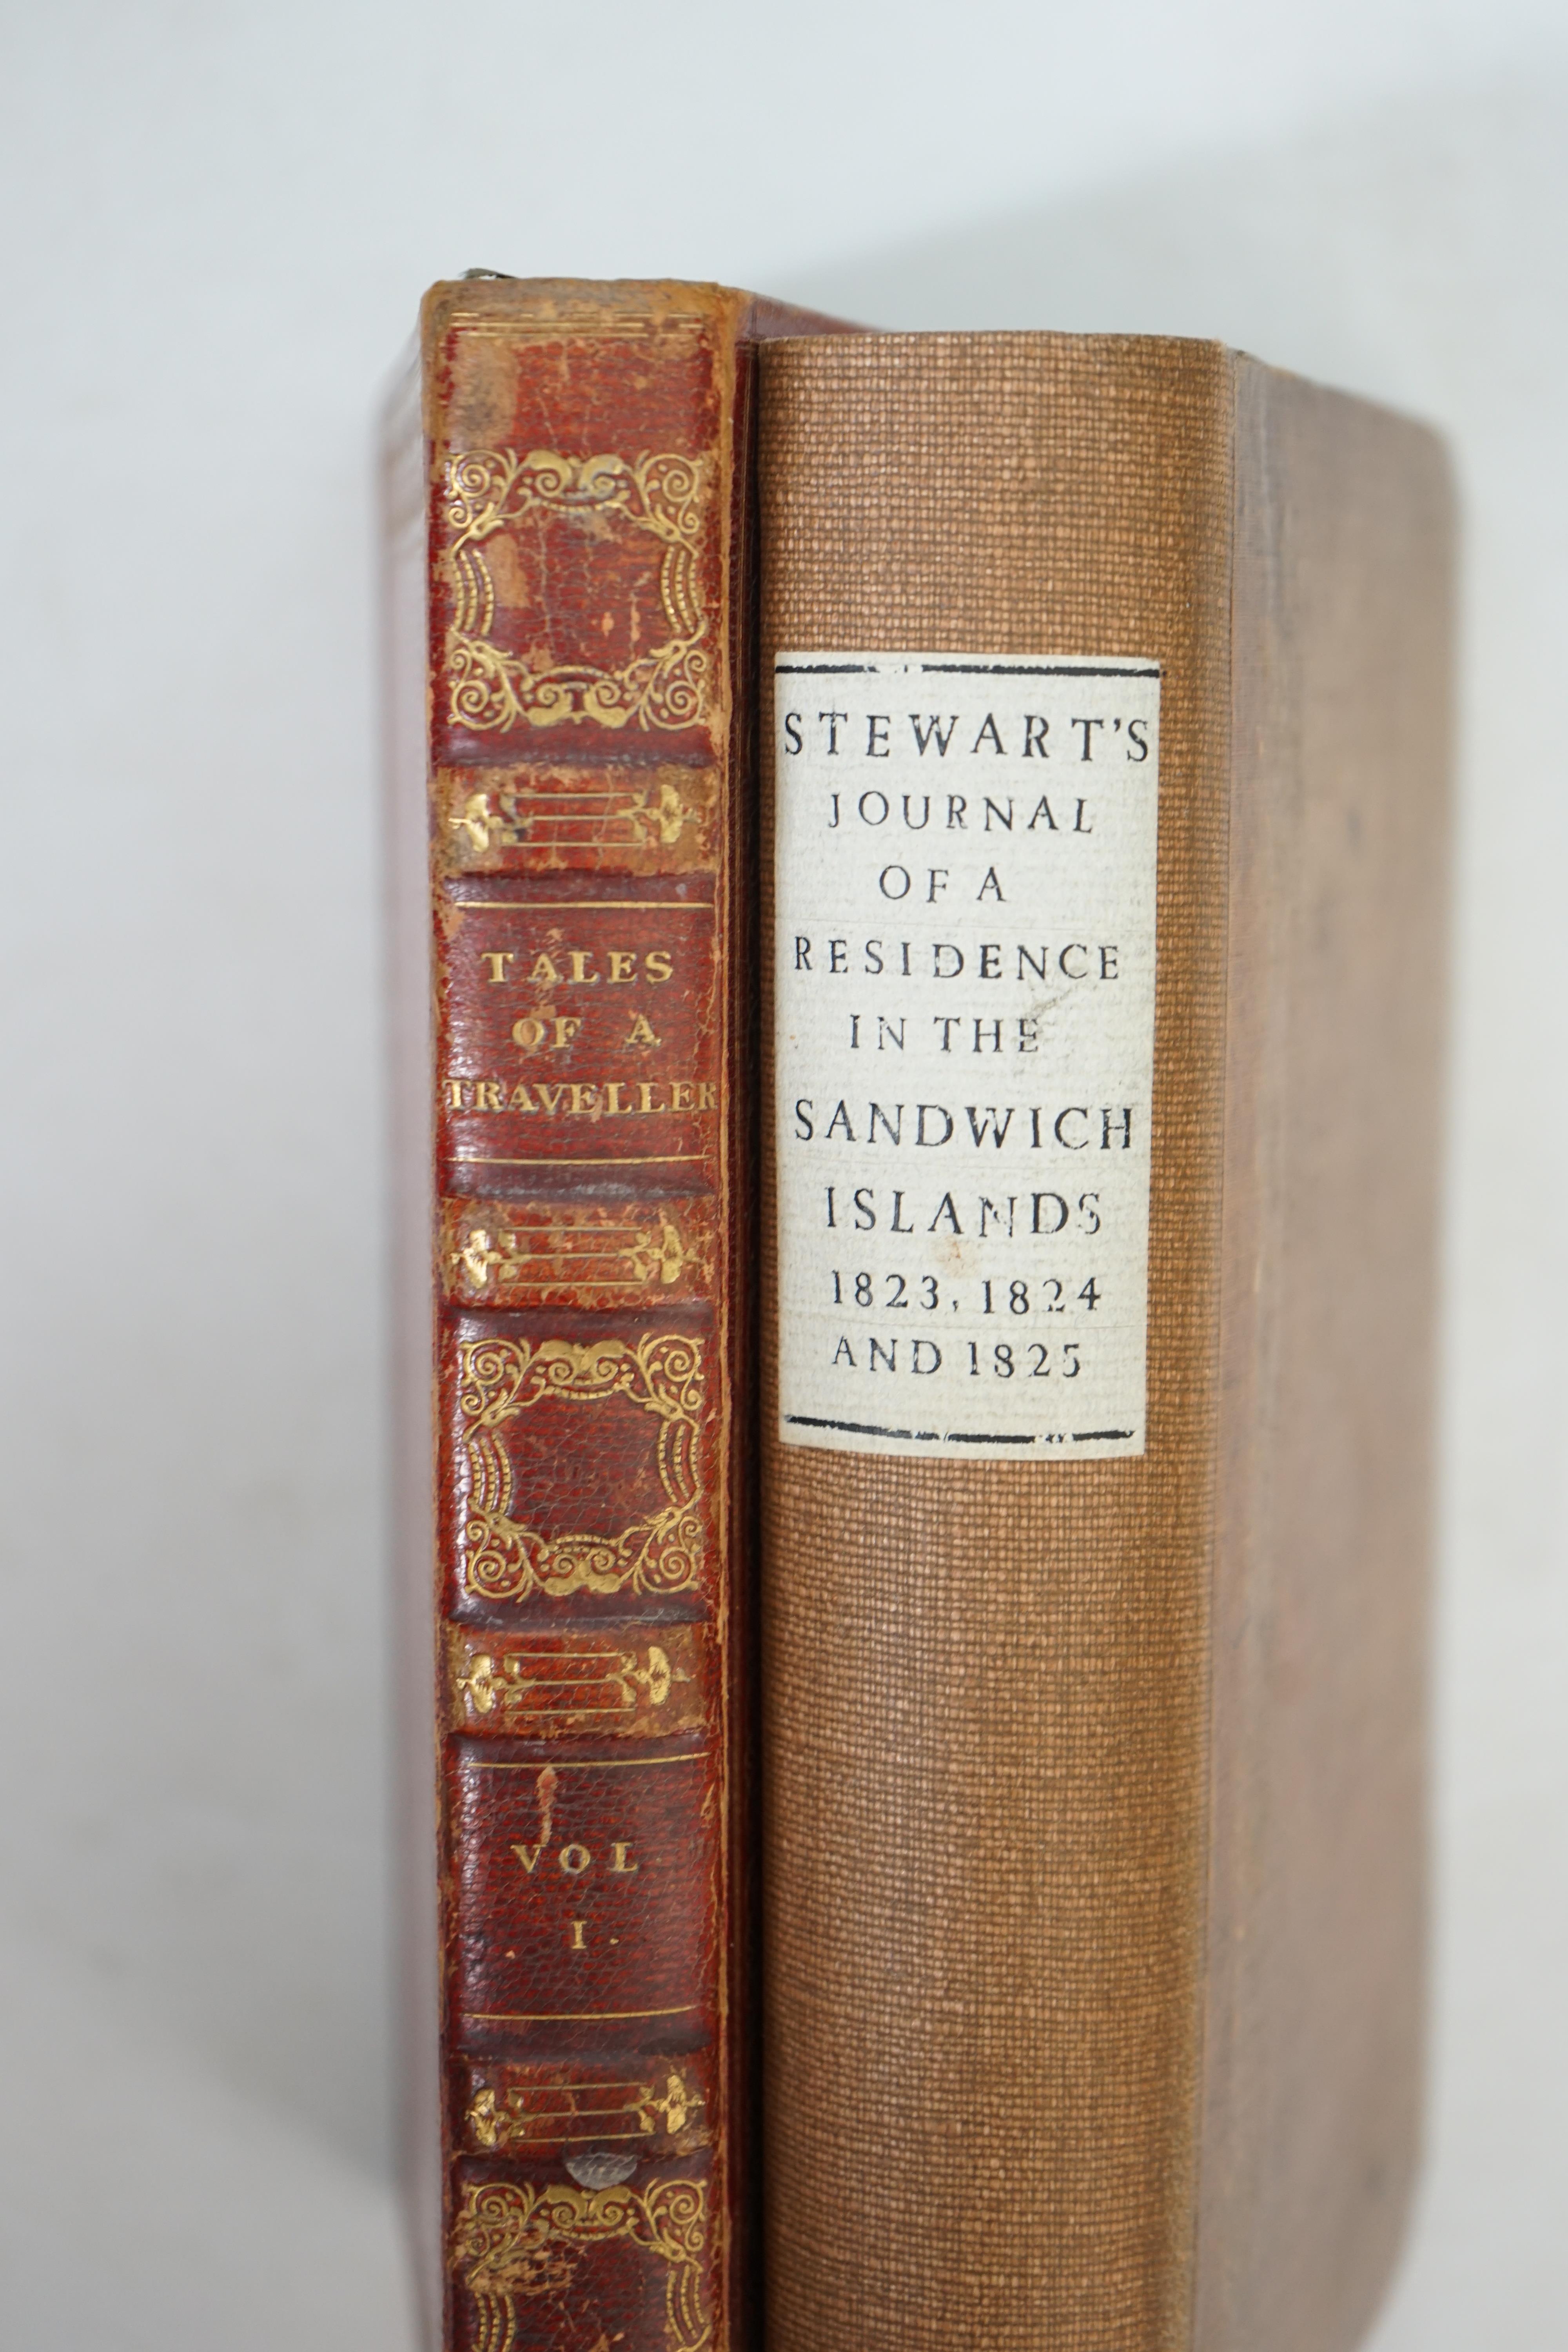 Stewart, Charles Samuel - Journal of a Residence in the Sandwich Islands, during the years 1823, 1824, and 1825, 3rd edition, 8vo, rebound cloth, with 1 folded engraved map and 1 plate (of 3), H. Fisher, Son, & P.Jackson